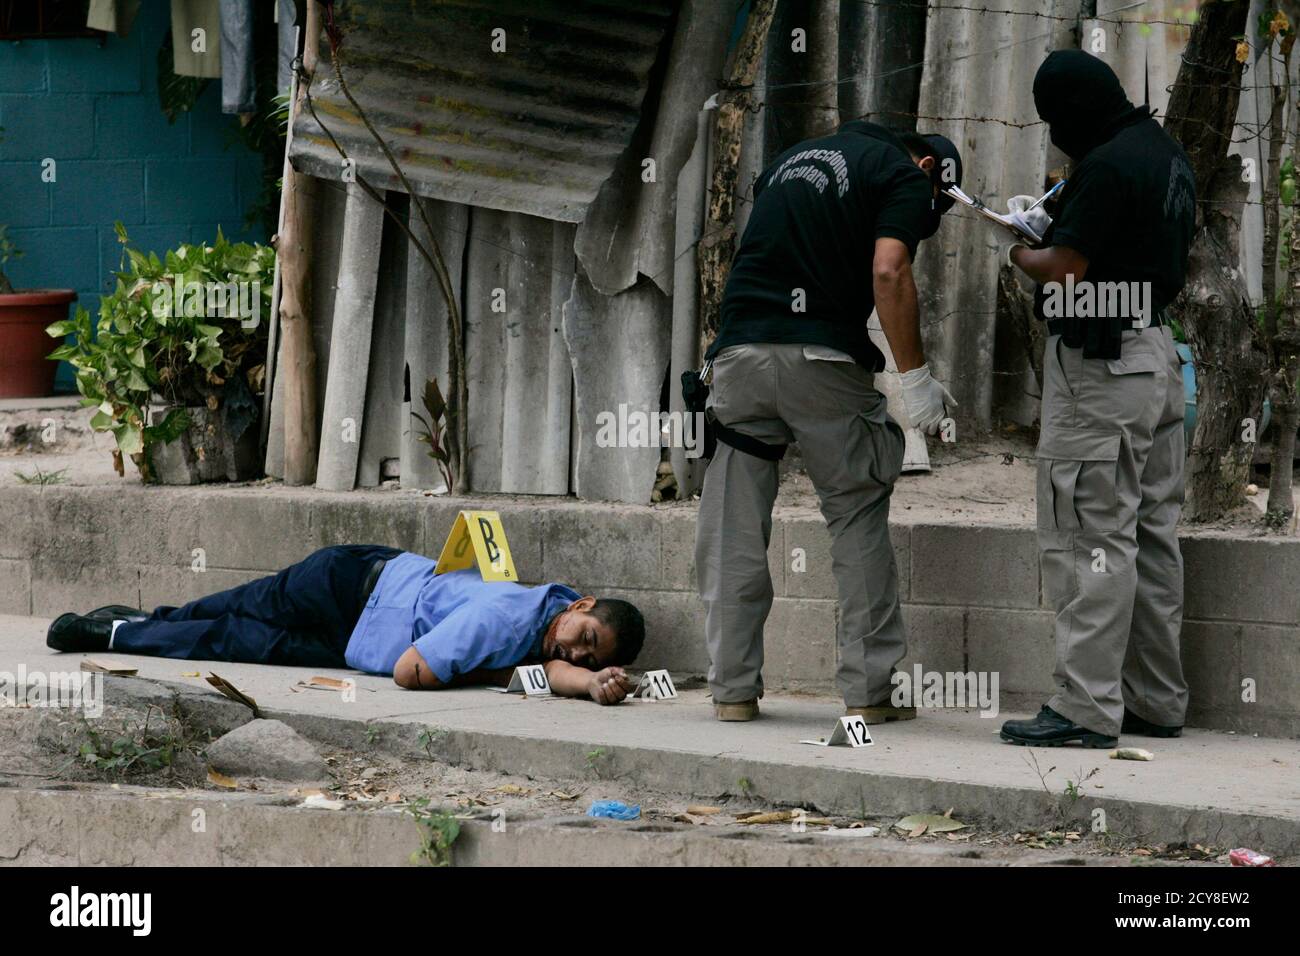 ATTENTION EDITORS - VISUALS COVERAGE OF SCENES OF DEATH AND INJURY Researchers at the National Civil Police (PNC) collect evidence from the crime scene where two employees of a company produces and markets bottled water were killed, in the city of Tonacatepeque, 10 km (6 miles) north of San Salvador, February 2, 2011. According to the police, 361 homicide cases have been reported in the country in the month of January. REUTERS/Luis Galdamez (EL SALVADOR - Tags: CRIME LAW) Stock Photo